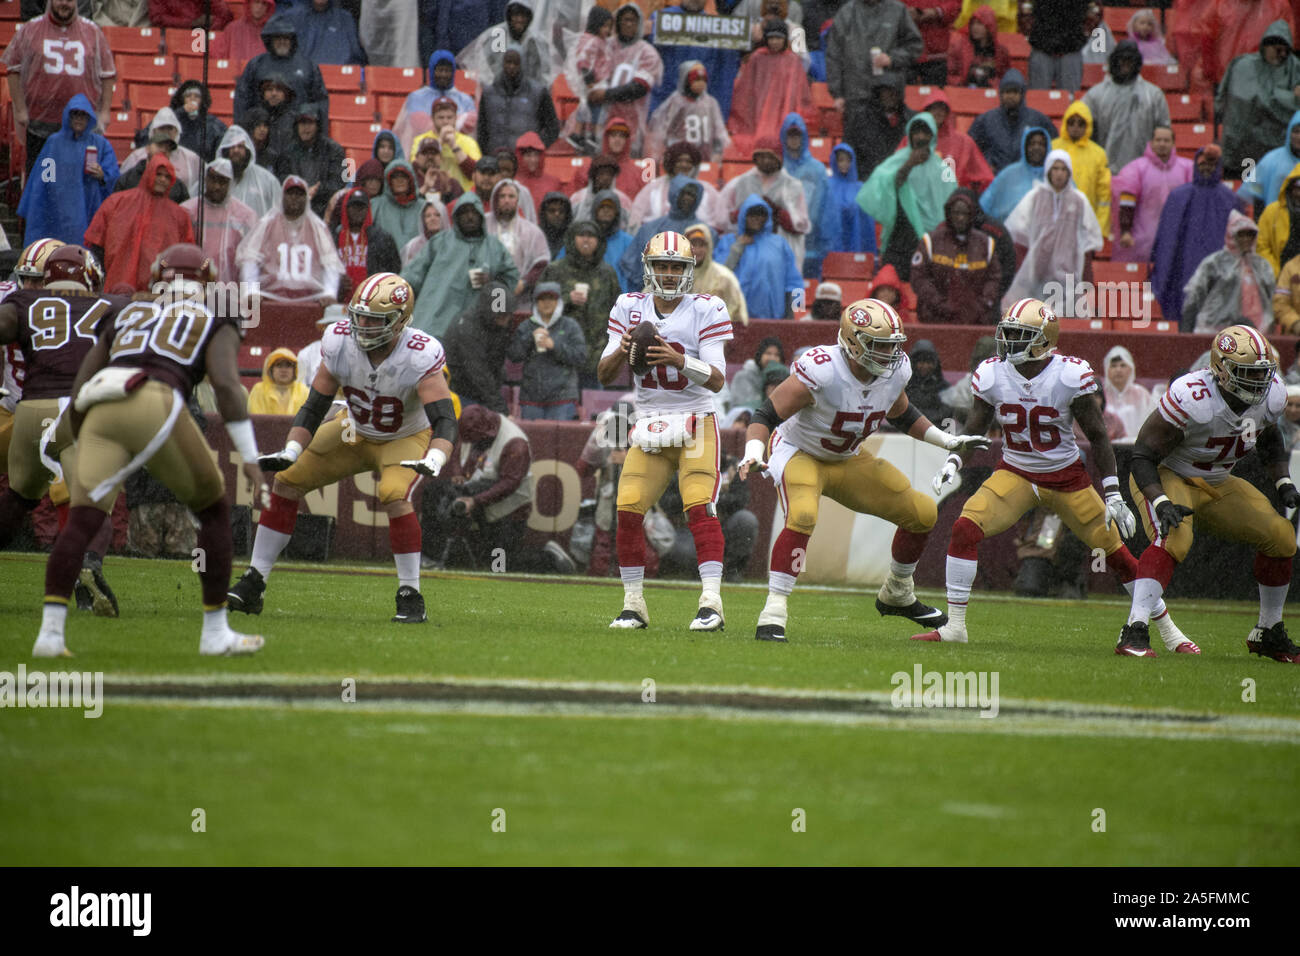 Landover, Maryland, USA. 20th Oct, 2019. San Francisco 49ers quarterback Jimmy Garoppolo (10) looks for a receiver during the first quarter against the San Francisco 49ers at FedEx Field in Landover, Maryland on Sunday, October 20, 2018. Also pictured from left are: Washington Redskins nose tackle Daron Payne (94), strong safety Landon Collins (20), San Francisco 49ers offensive guard Mike Person (68), center Weston Richburg (58), running back Tevin Coleman (26) and offensive guard Laken Tomlinson (75). The 49ers won the game 9 - 0 Credit: Ron Sachs/CNP/ZUMA Wire/Alamy Live News Stock Photo